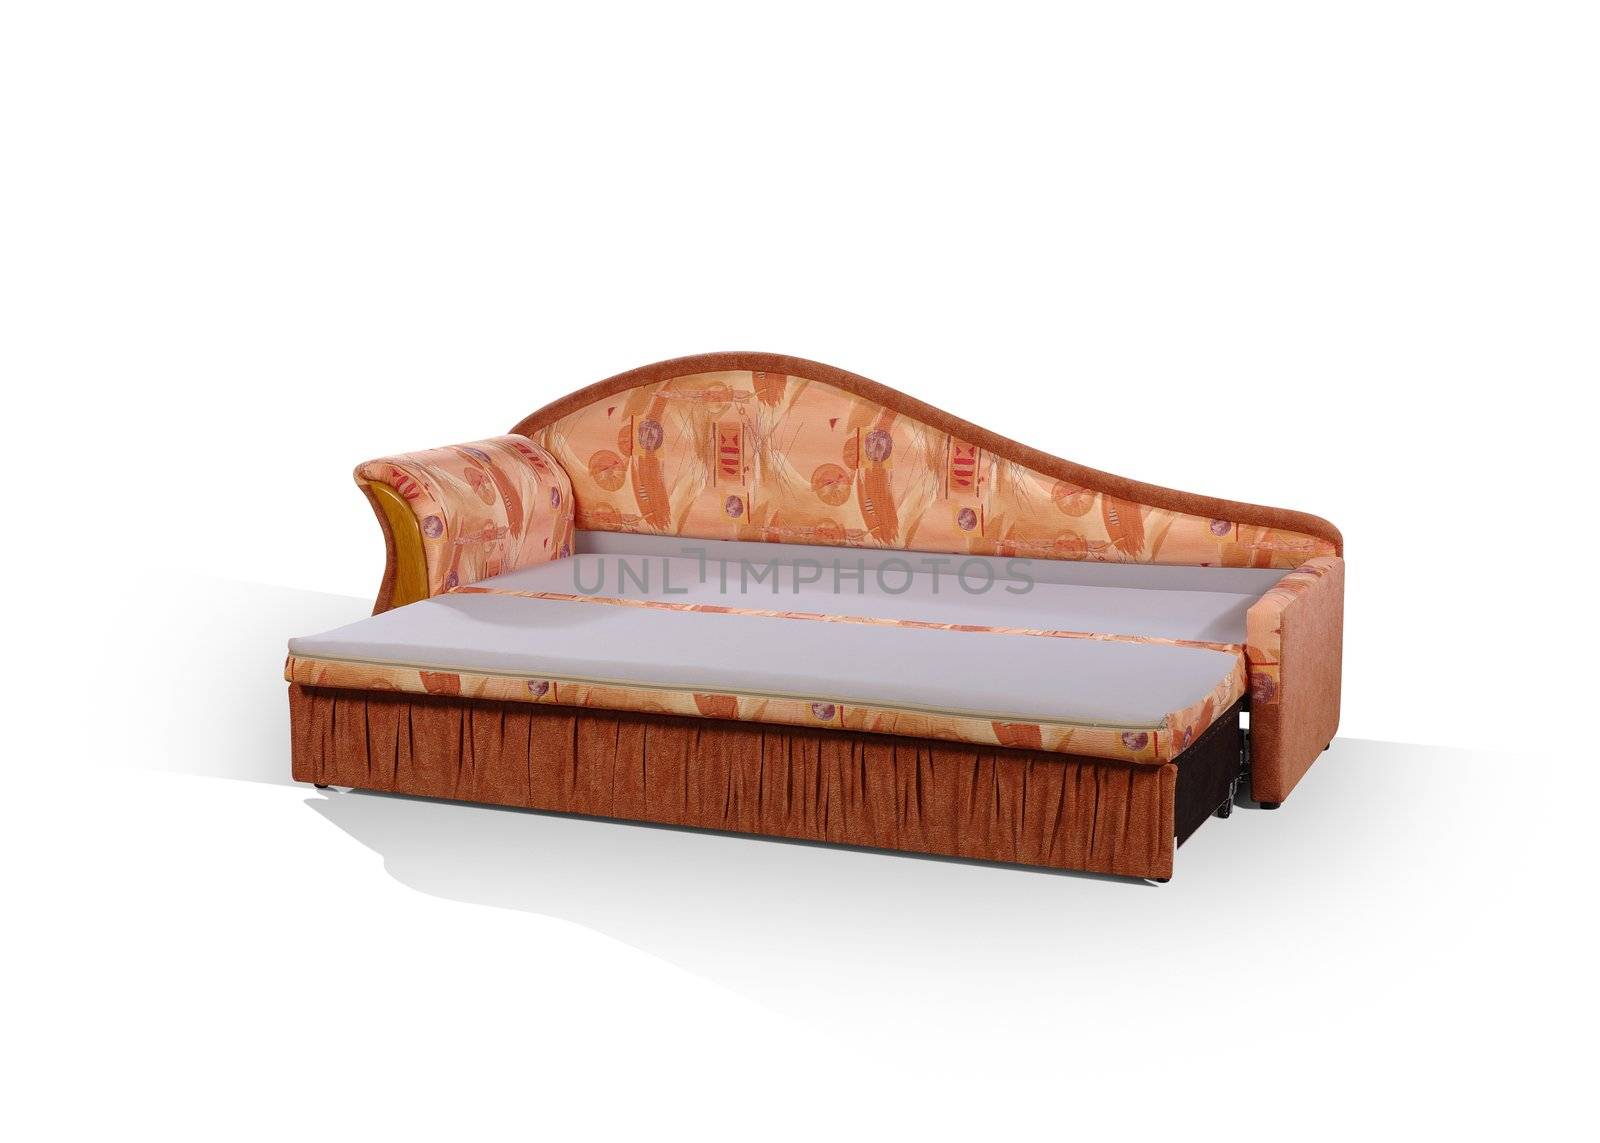 sofa is decomposed in a bed on a white background